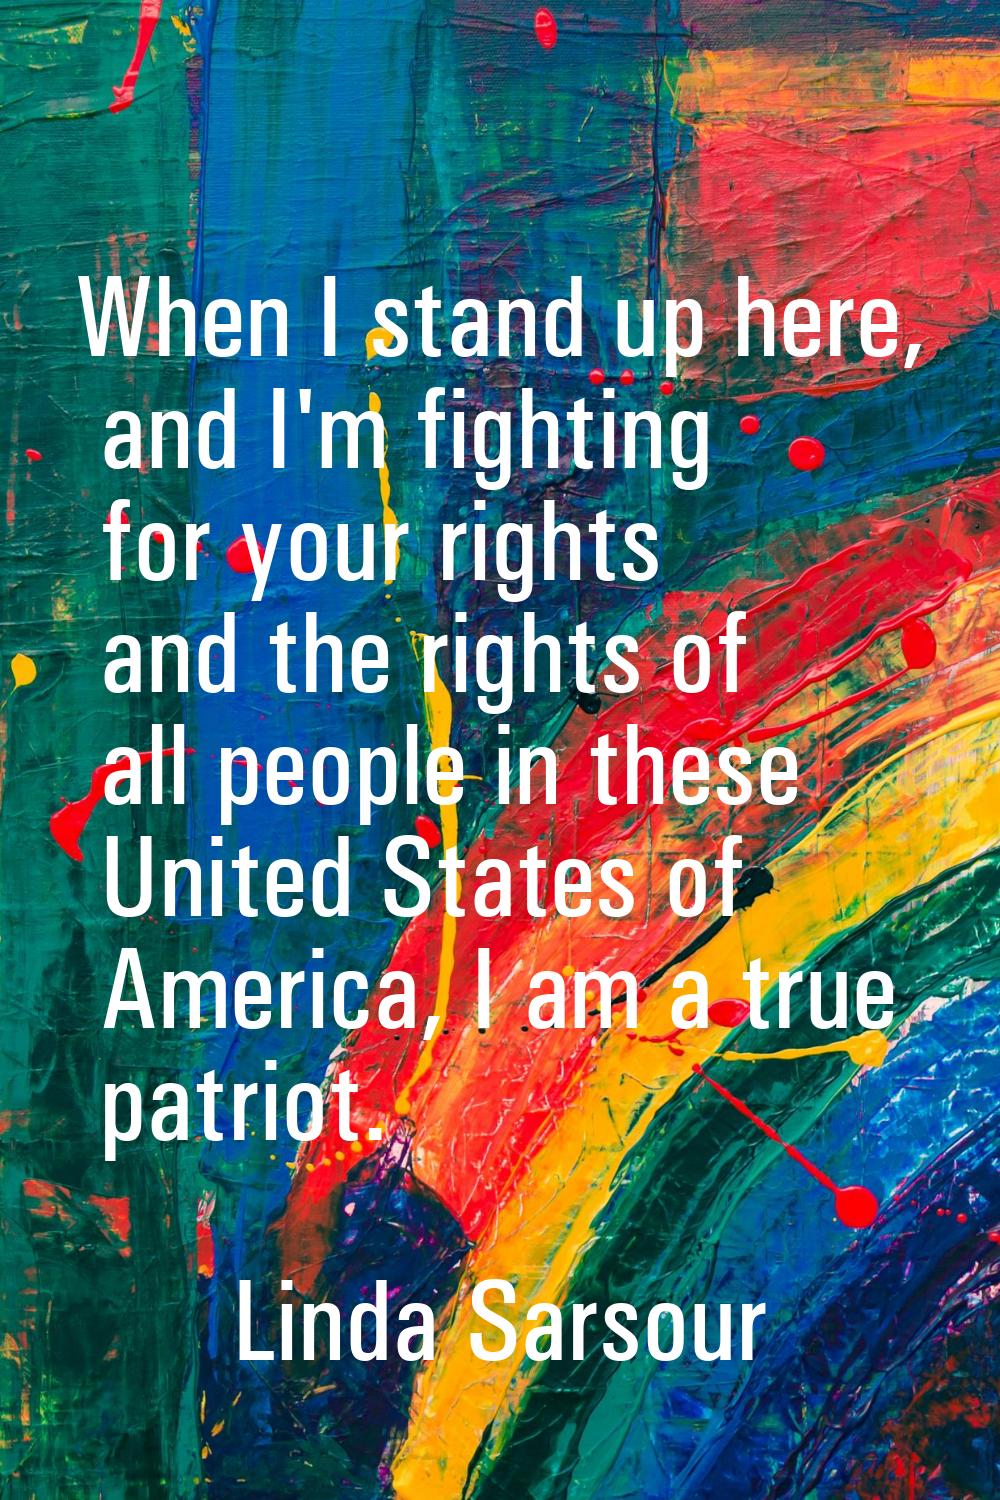 When I stand up here, and I'm fighting for your rights and the rights of all people in these United